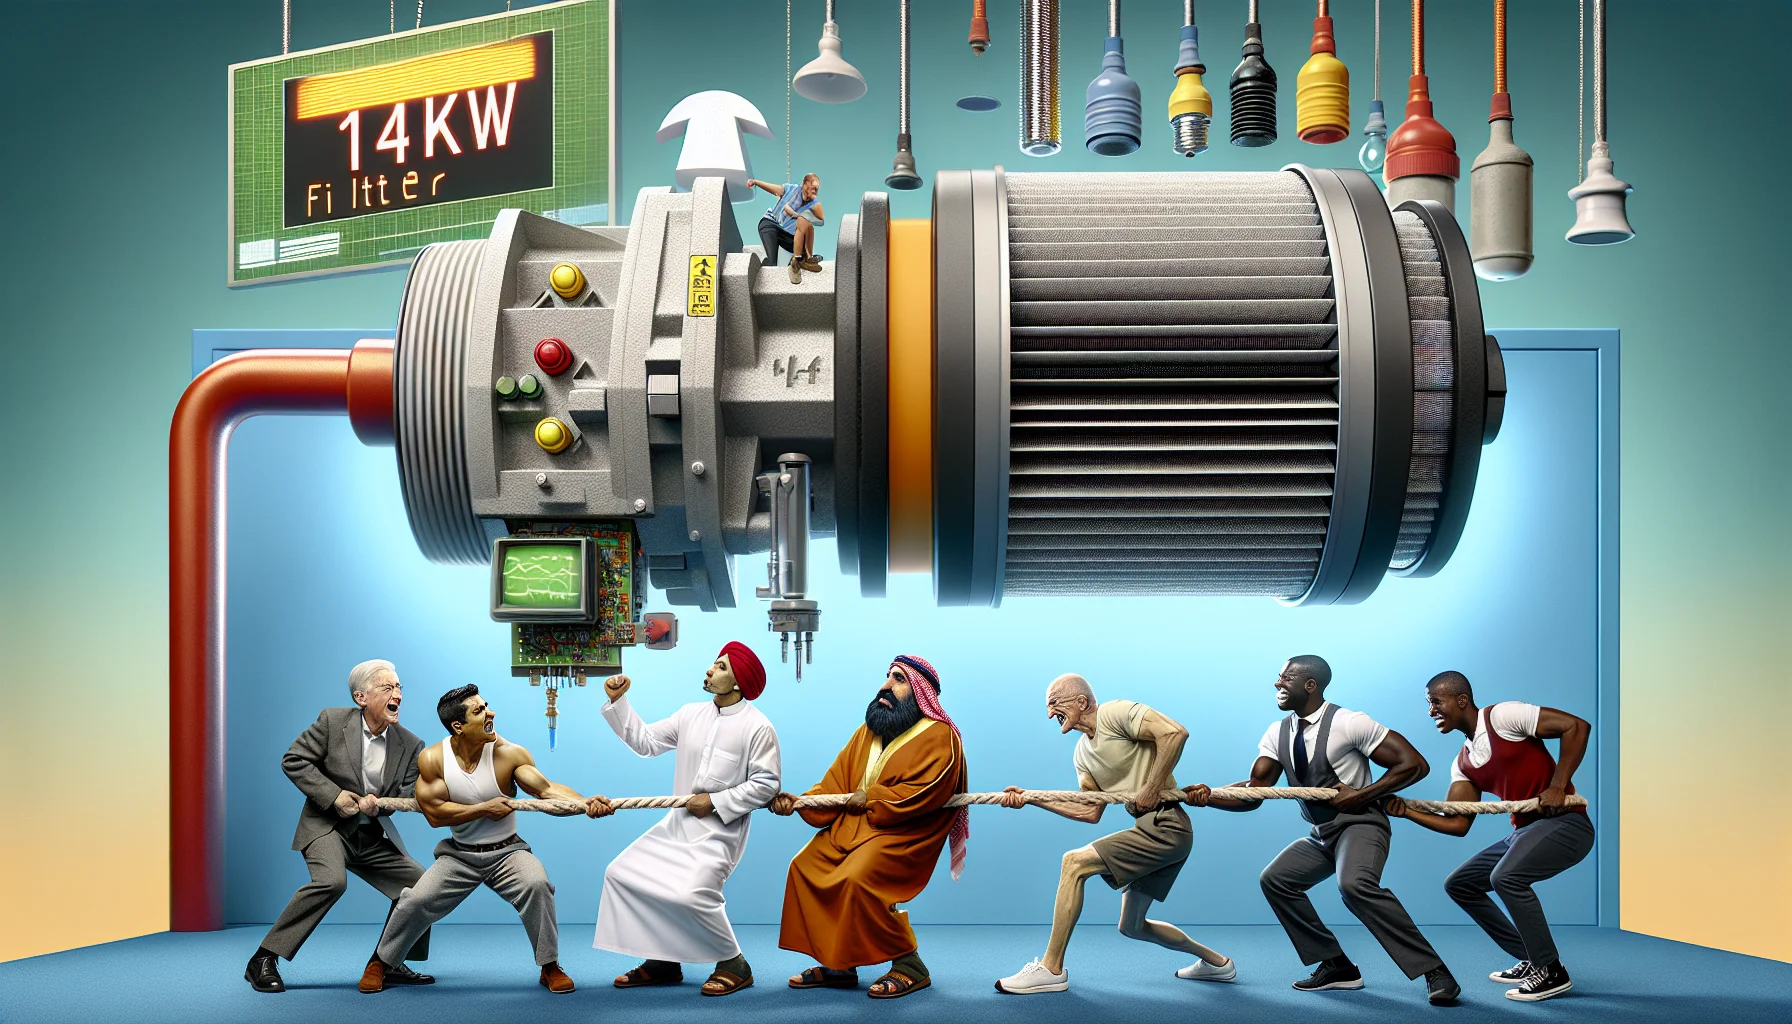 Visualize a humorous scenario that showcases a 14kW Filter. This filter is playfully personified and is actively participating in a game of tug-of-war with a group of individuals representing different descents - a Hispanic muscular woman, a South Asian elderly man, a Middle Eastern young man, and a Black athletic woman. The individuals are all straining against the powerful force of the 14kW Filter, signifying its immense power. On the side, a huge electronic display is brightly showing '14kW Filter - Power Up Your Life!' This amusing scene is meant to represent the concept of generating electricity, adding a fun twist to this important conversation about sustainable energy sources.